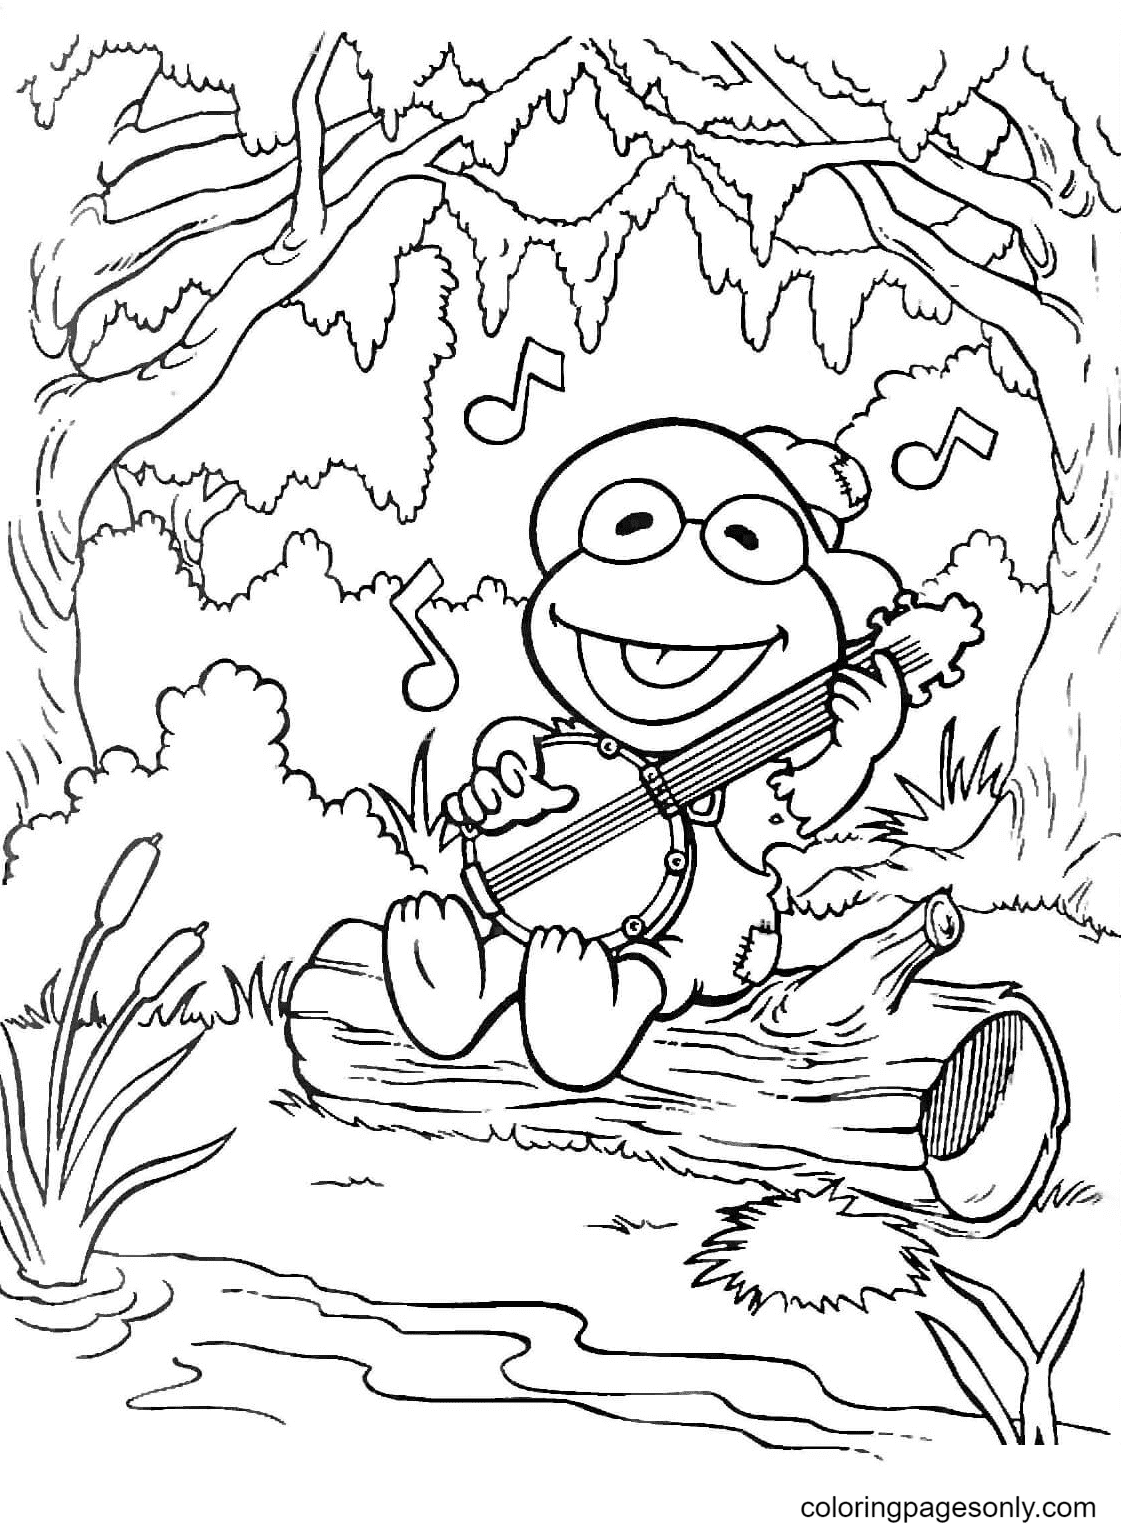 Kermit Sings A Song Coloring Page